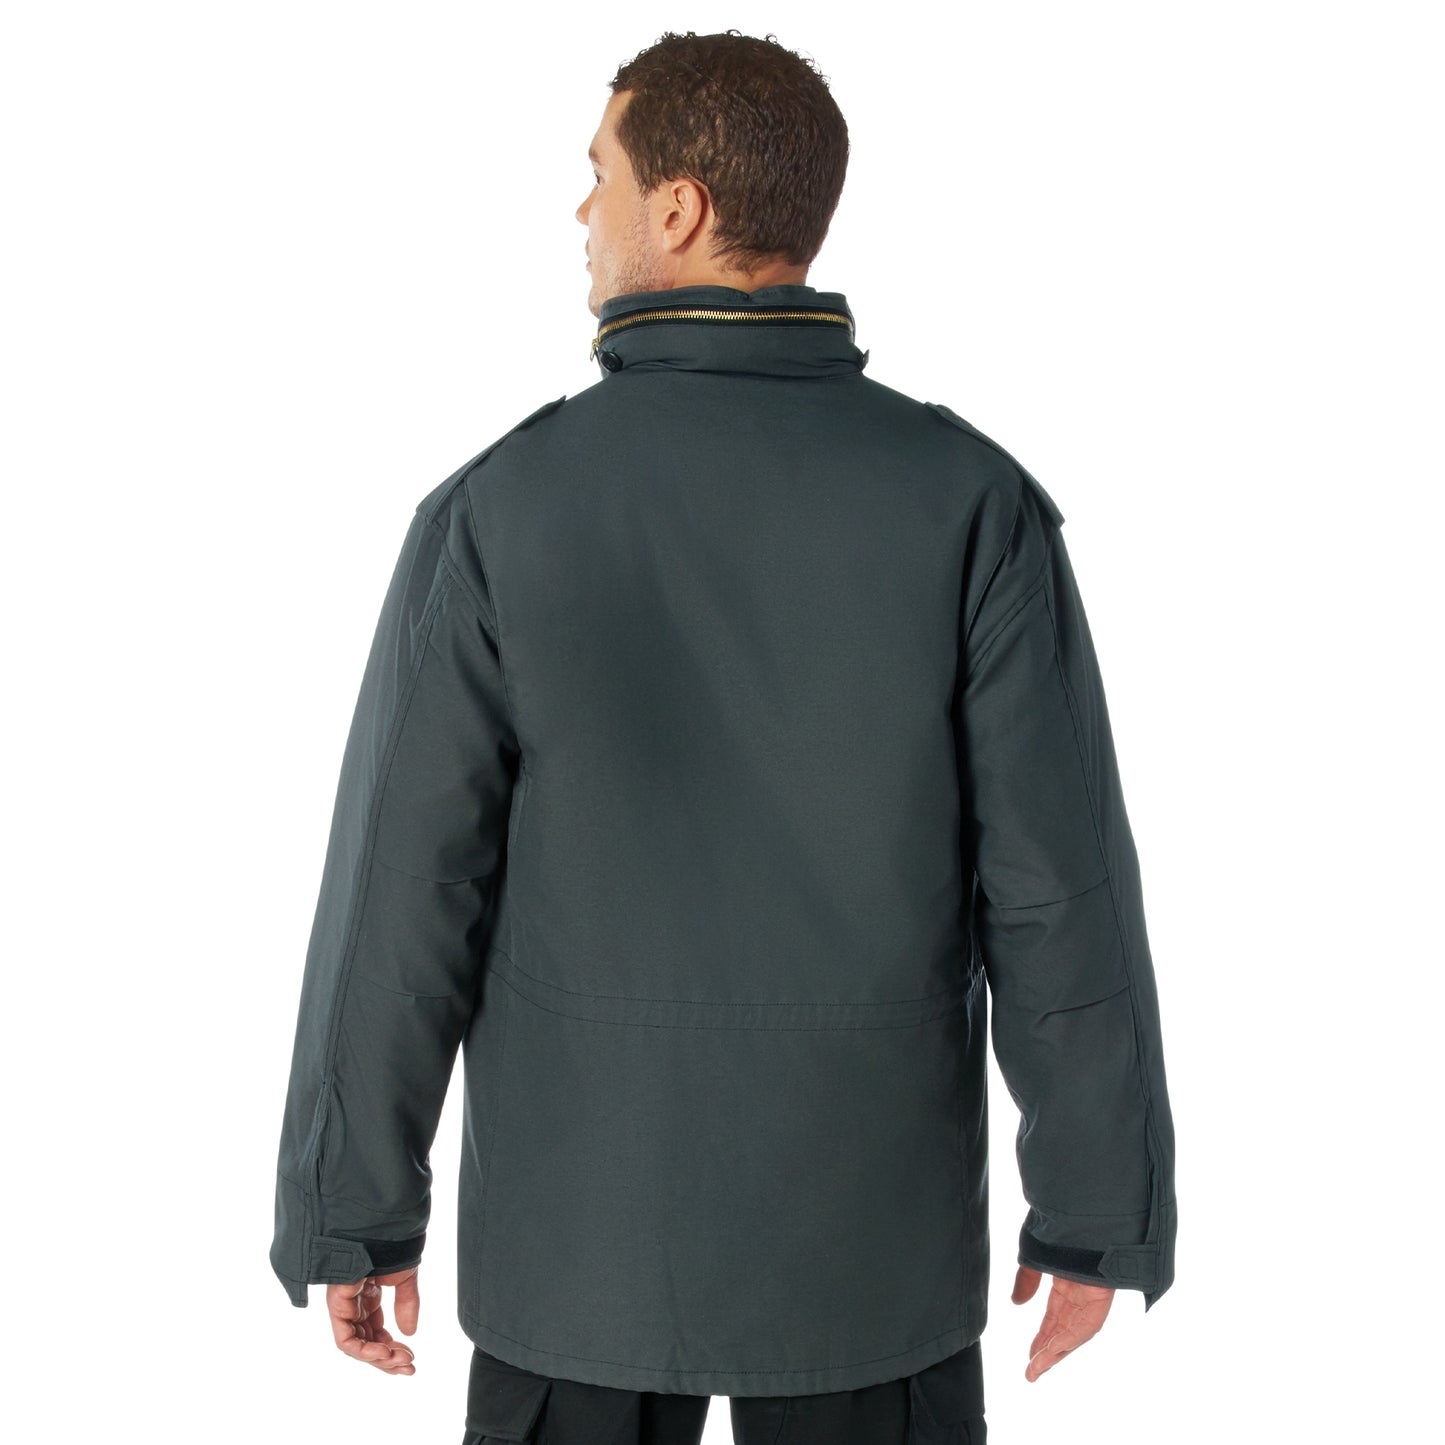 Rothco M-65 Field Jacket With Liner - Gumnetal Grey